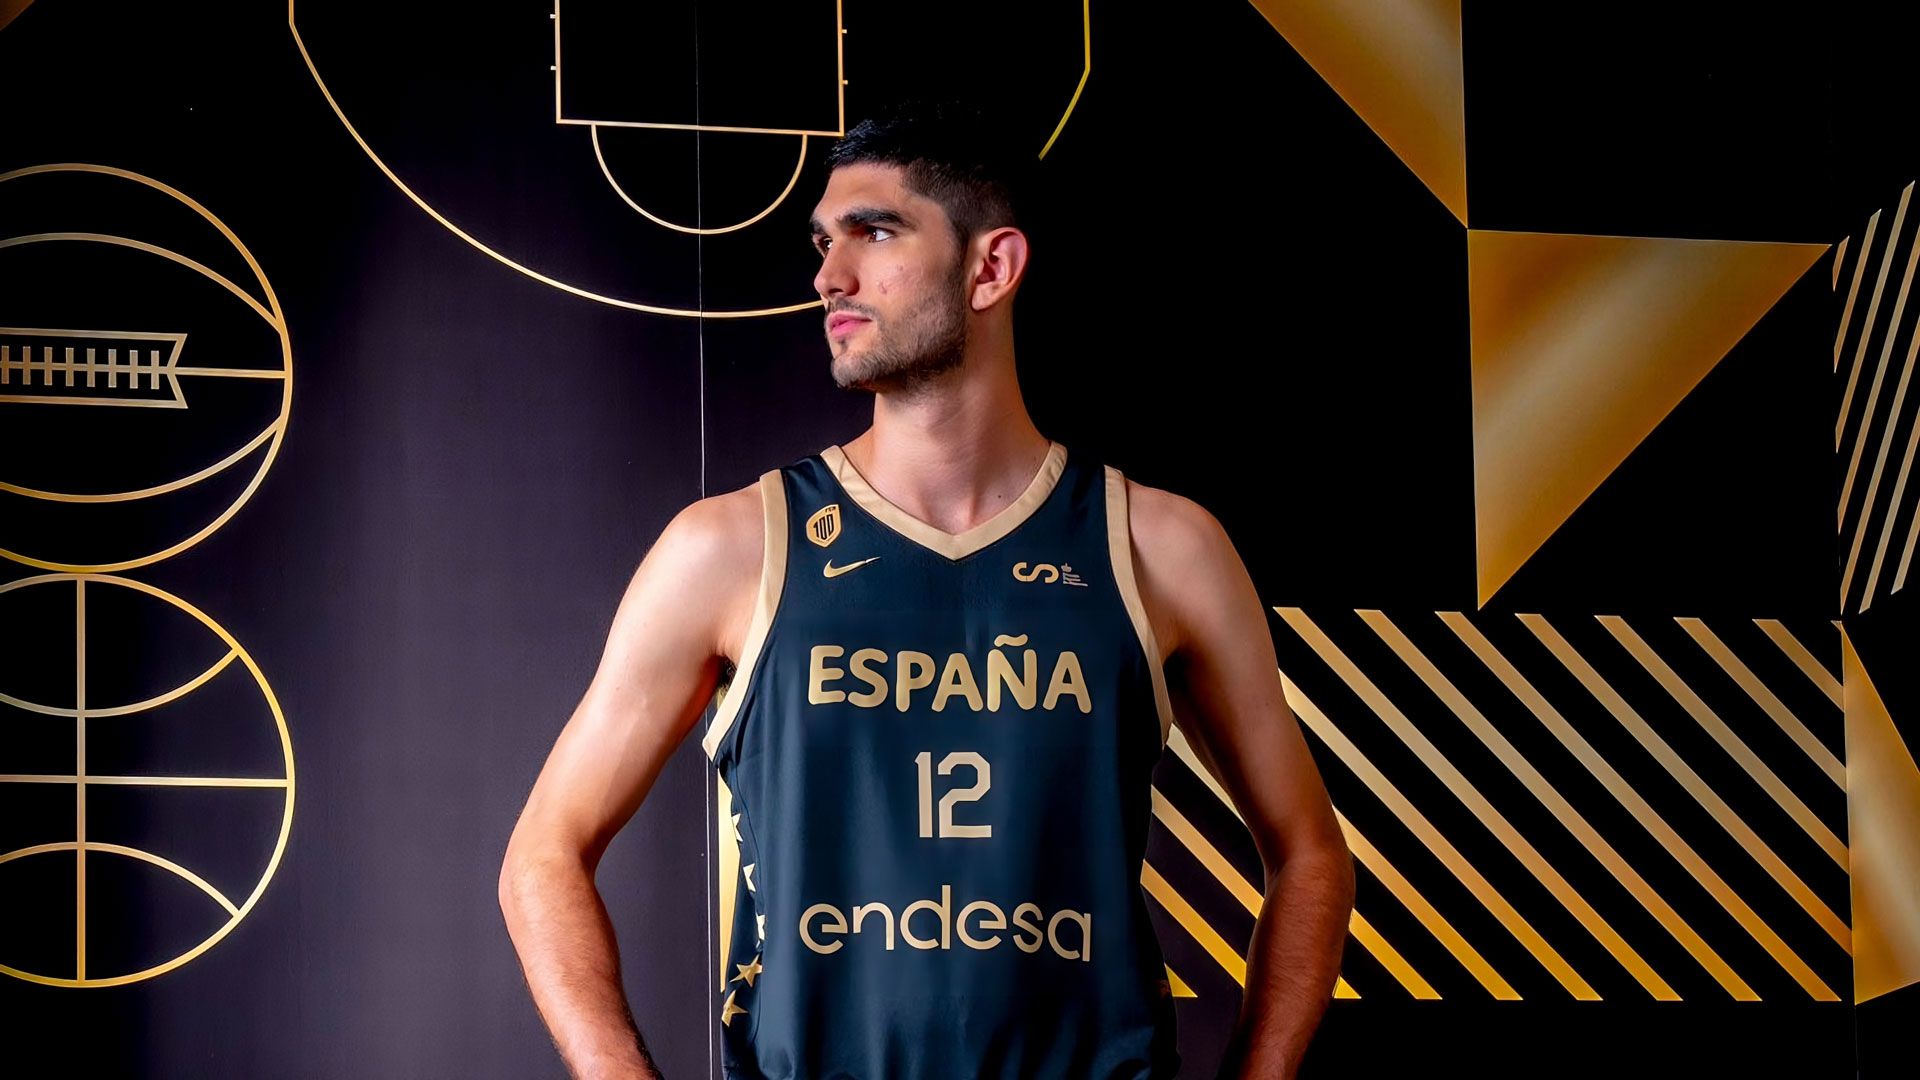 From Spain to the US for child basketball prodigy